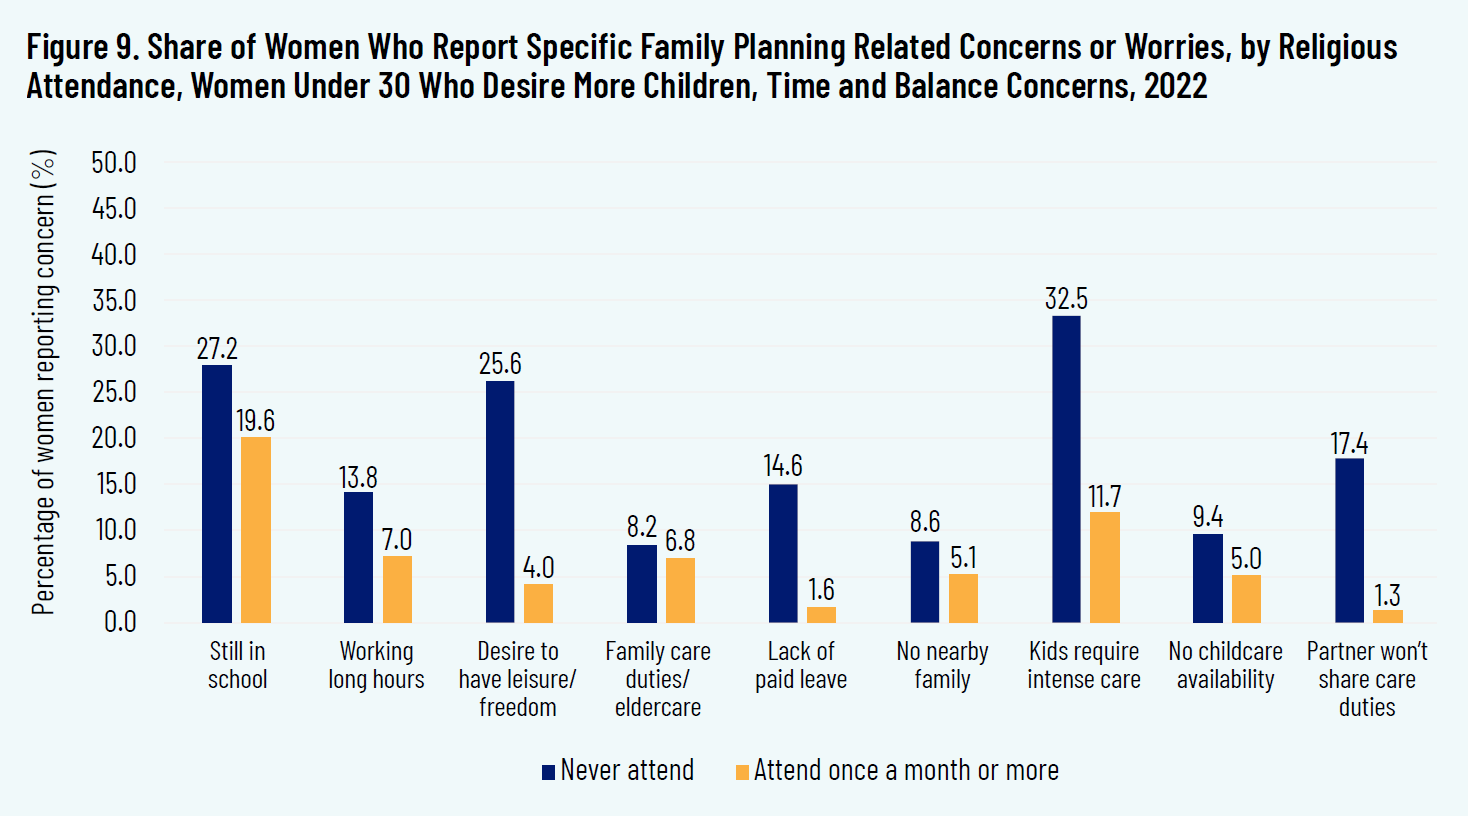 Figure 9. Share of Women Who Report Specific Family Planning Related Concerns or Worries, by Religious Attendance, Women Under 30 Who Desire More Children, Time and Balance Concerns, 2022